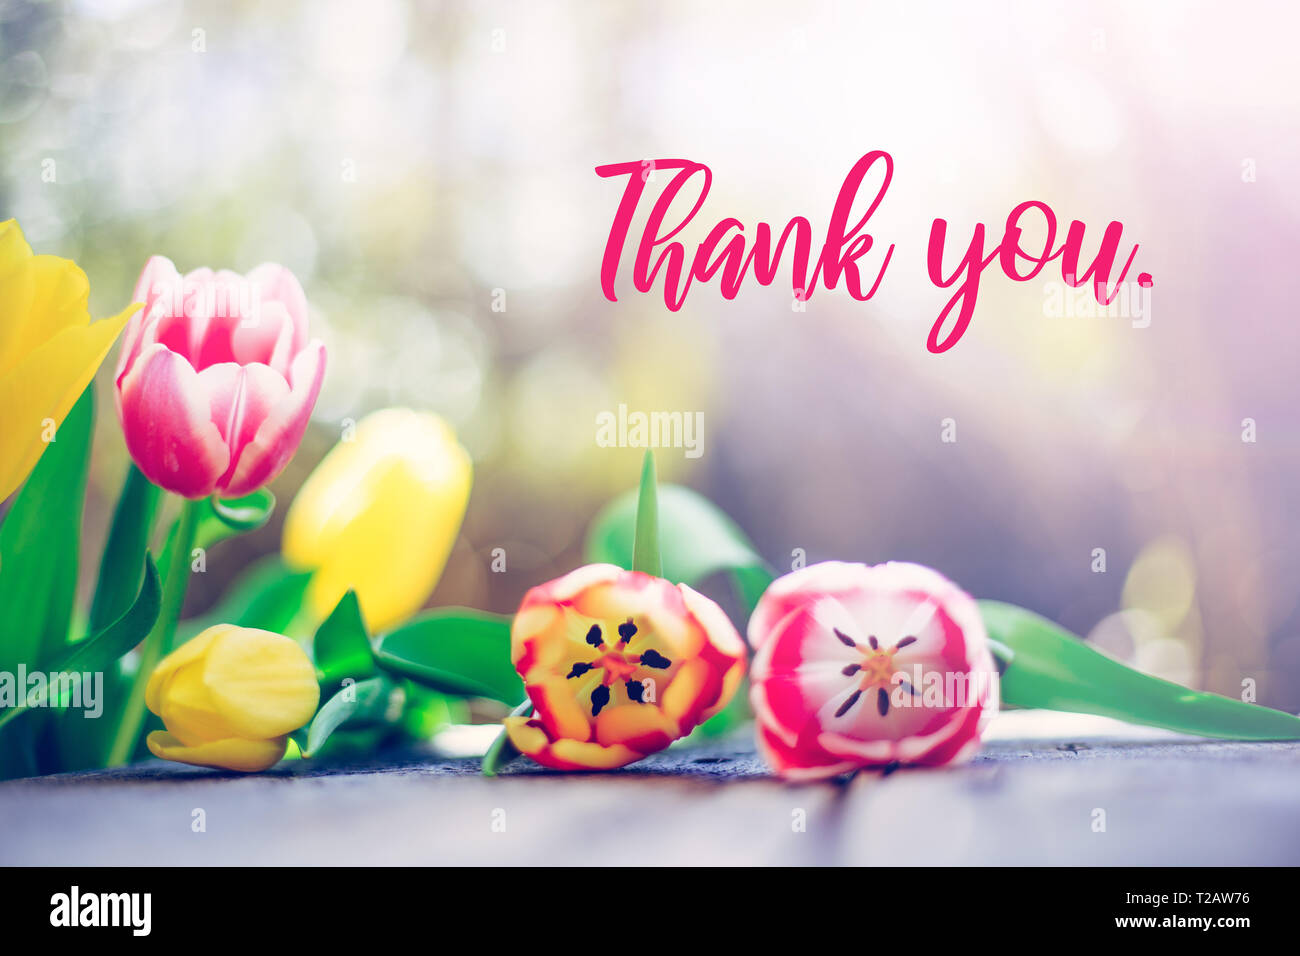 Thank you: Spring flowers (tulips) are lying on a rustic wood table, garden  in the blurry background, “Thank you” Stock Photo - Alamy